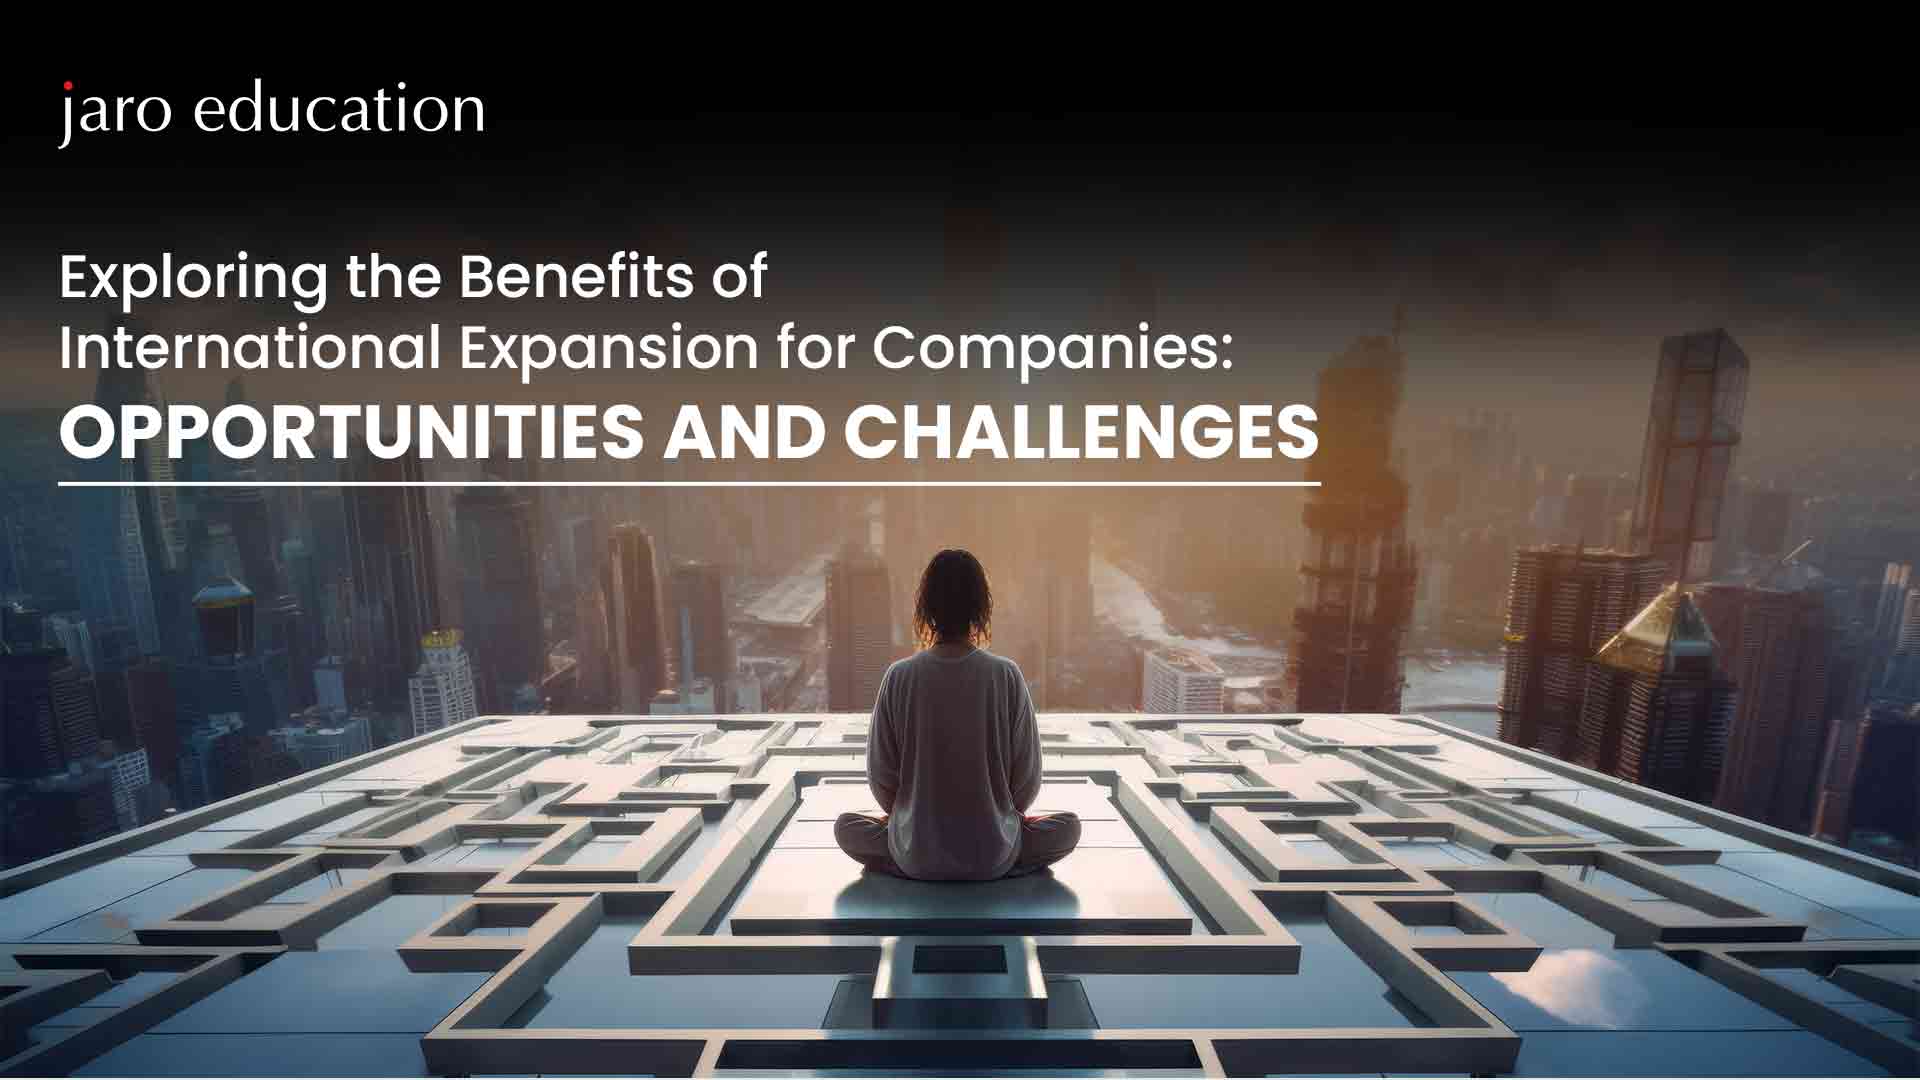 Exploring the Benefits of International Expansion for Companies Opportunities and Challenges